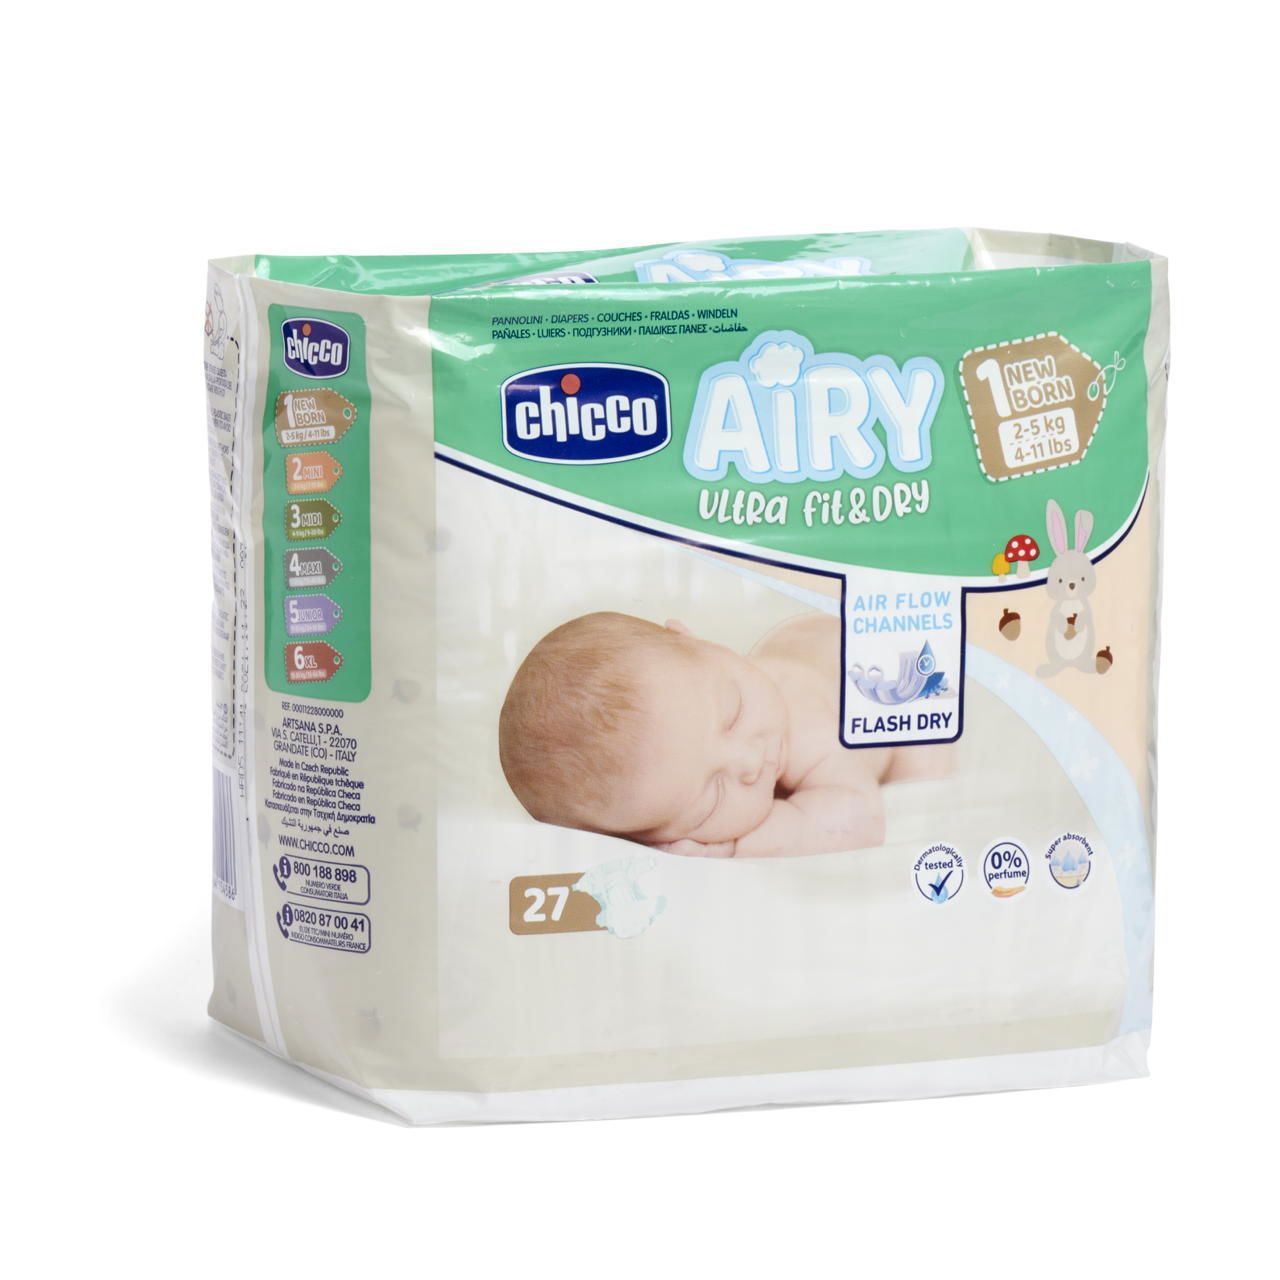 FRALDAS CHICCO AIRY - T1 – 27un image number 0